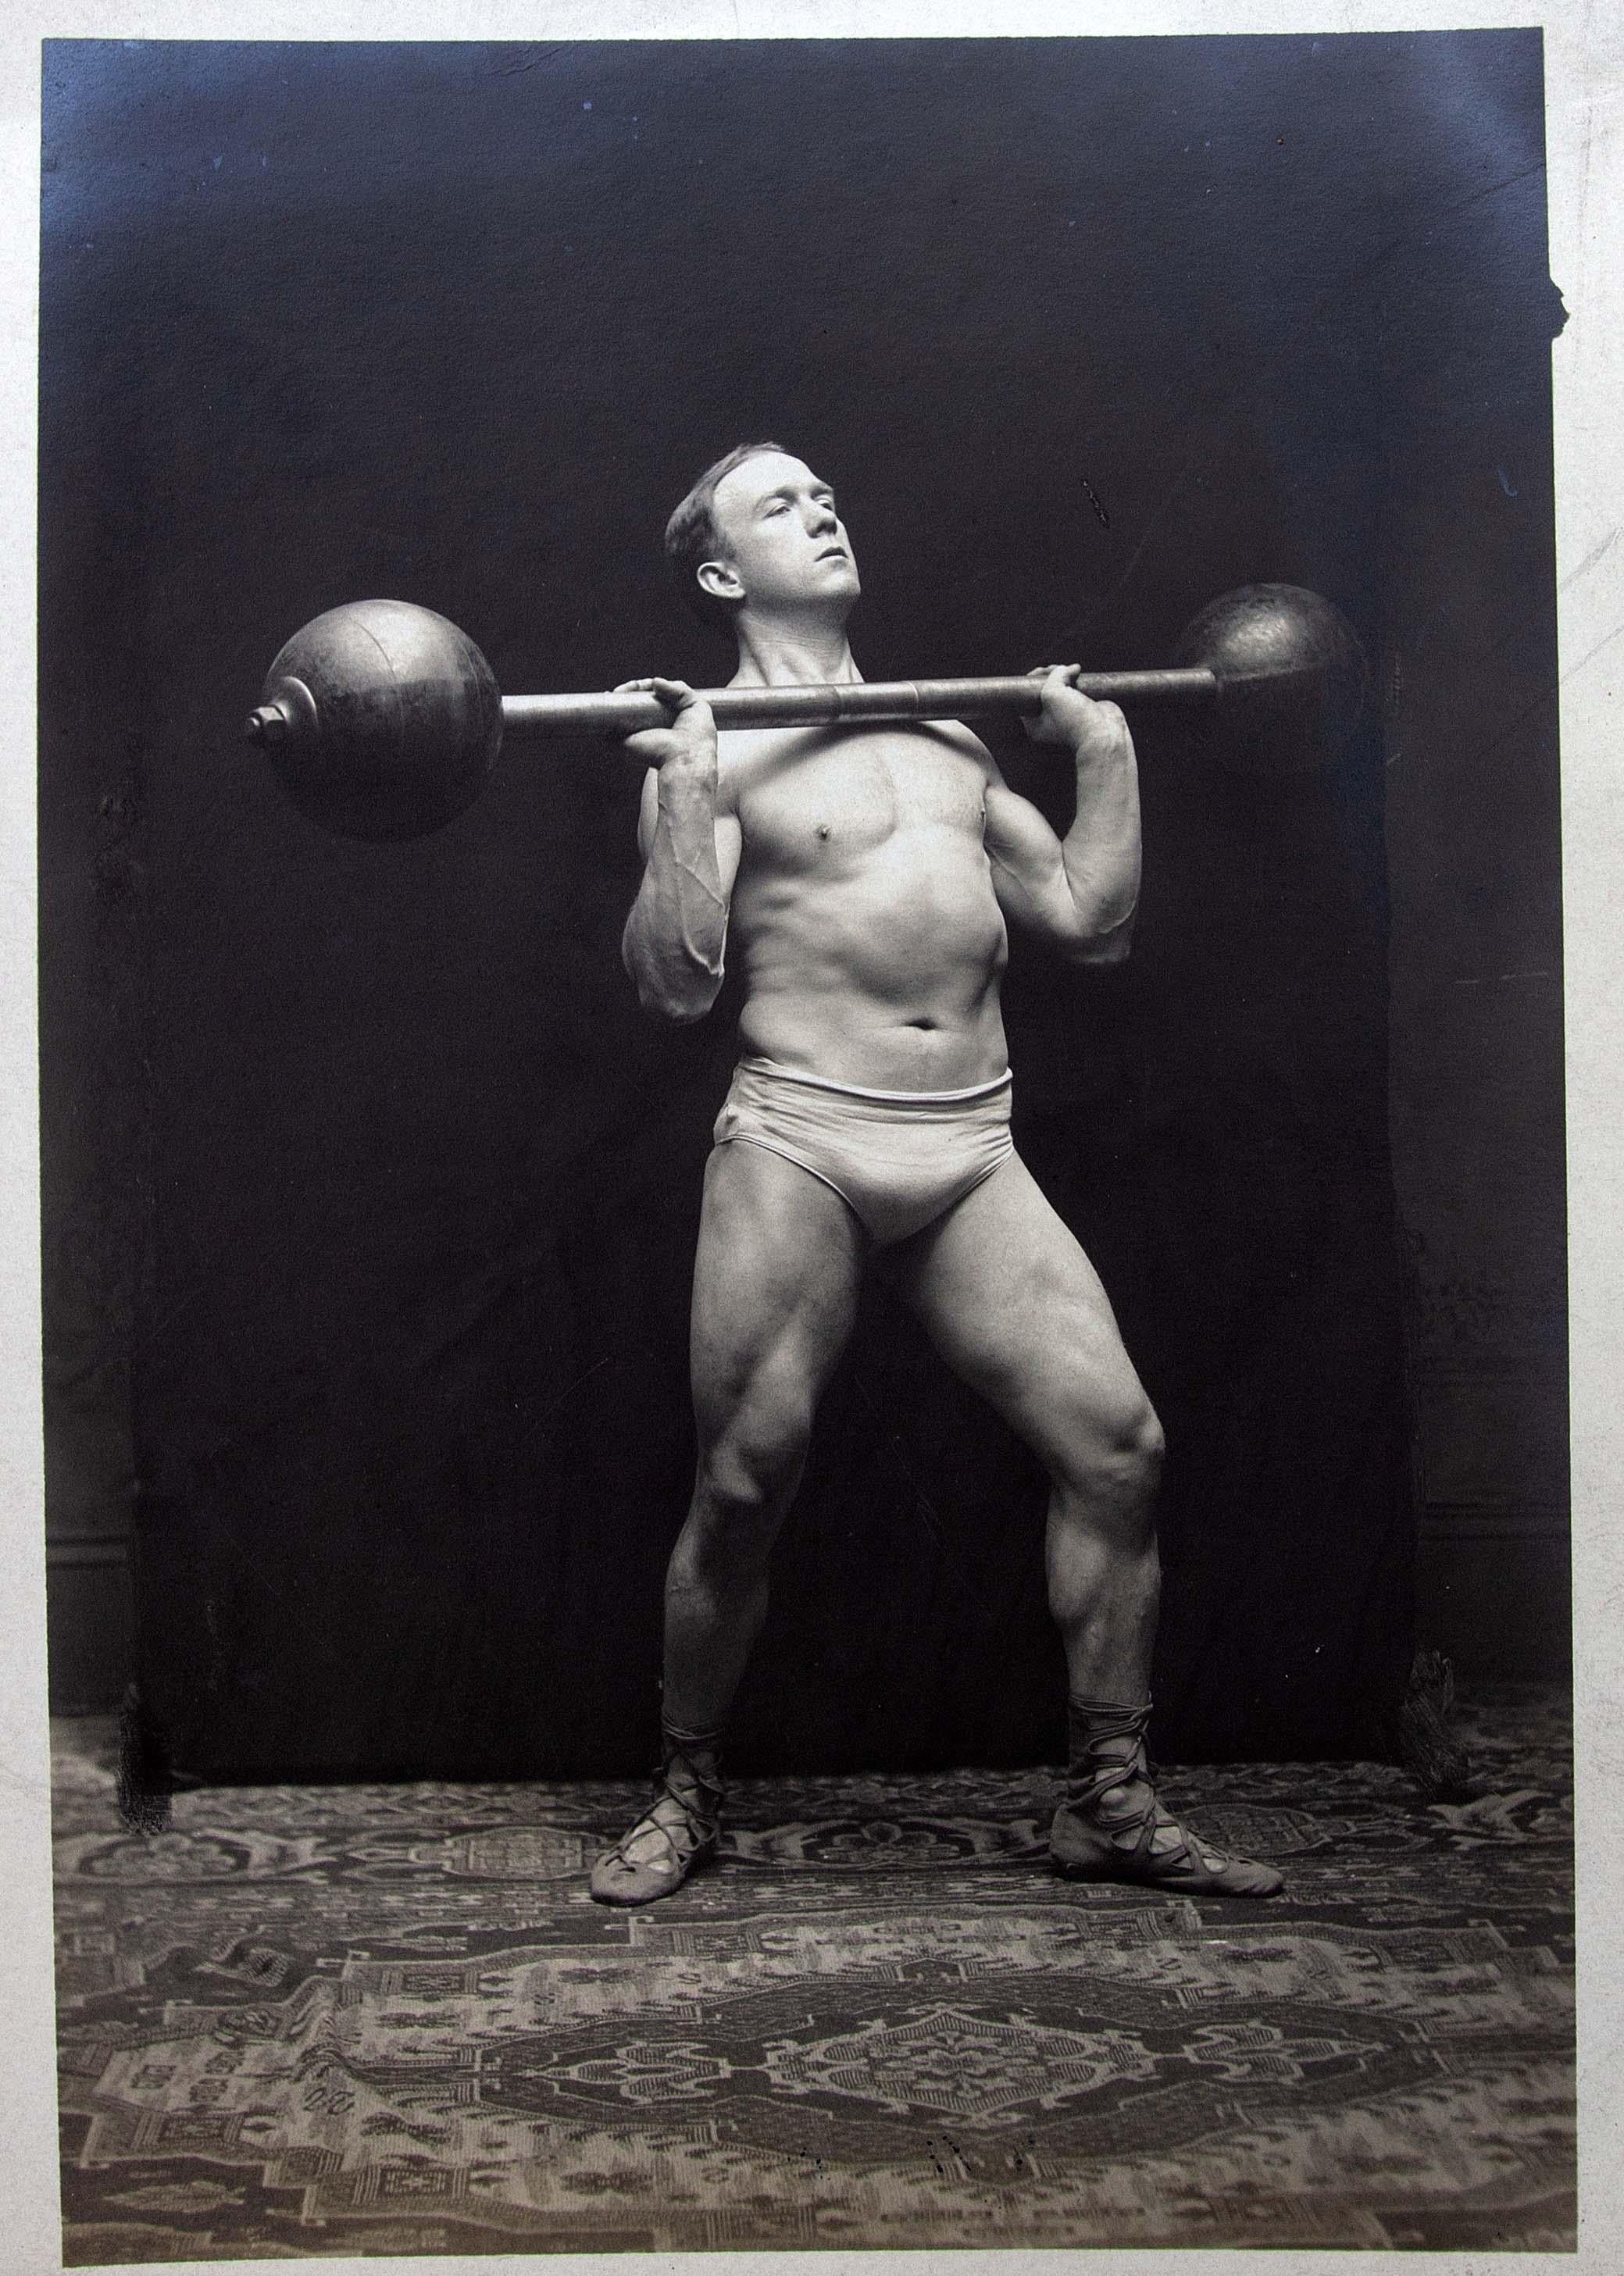 Large collection of early 20th century strongman photographs. Each 5